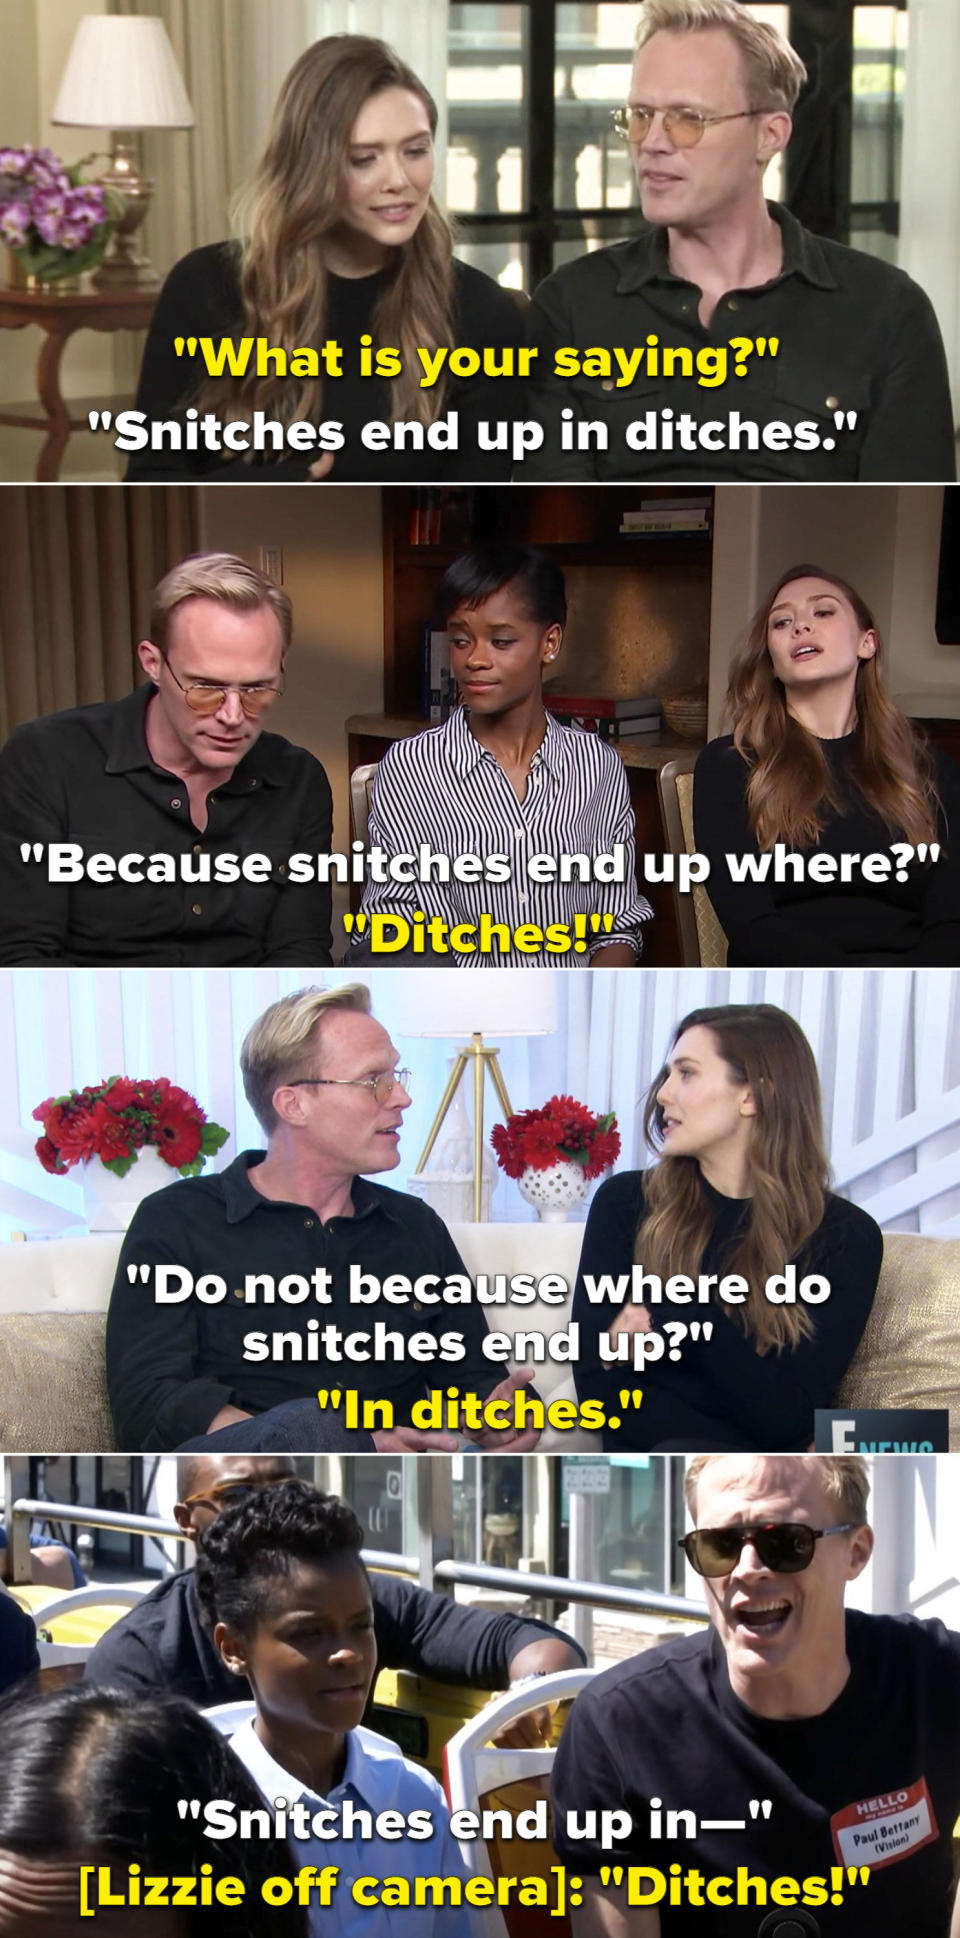 Paul and Lizzie repeating "Snitched end up in ditches" in four different interviews